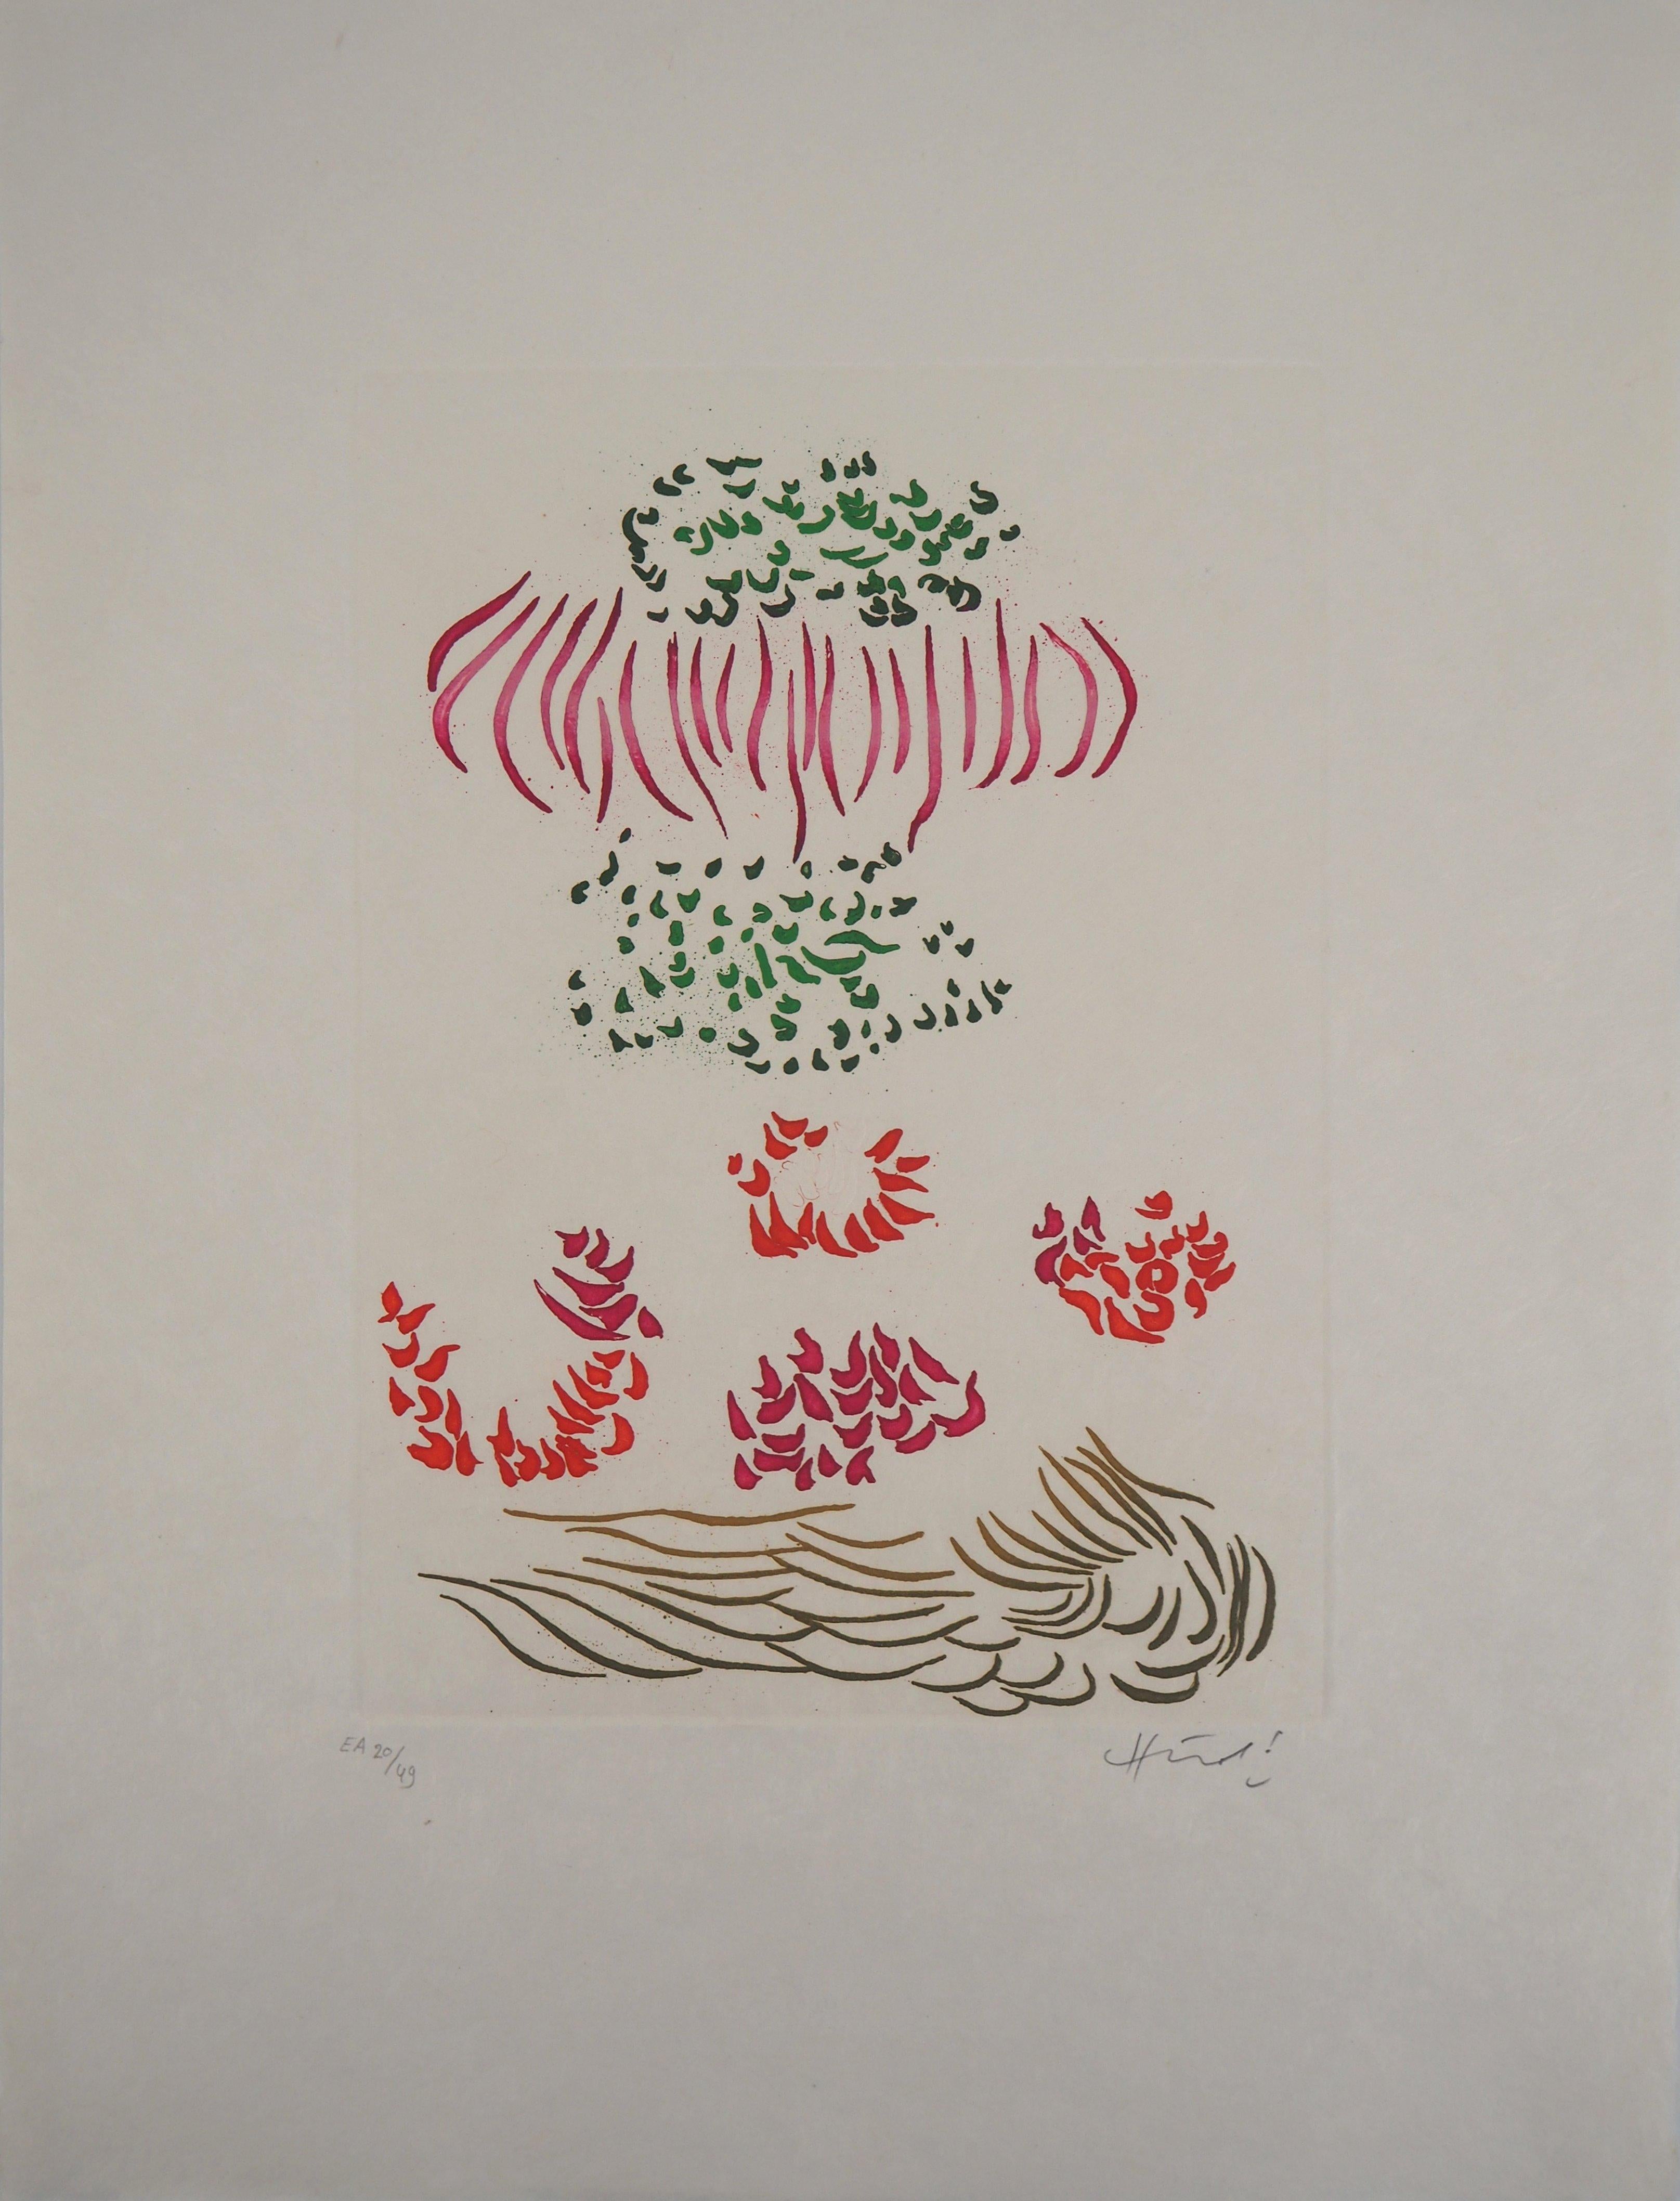 Jacques HEROLD Abstract Print - Surrealists flowers - Original color Etching and Aquatint 